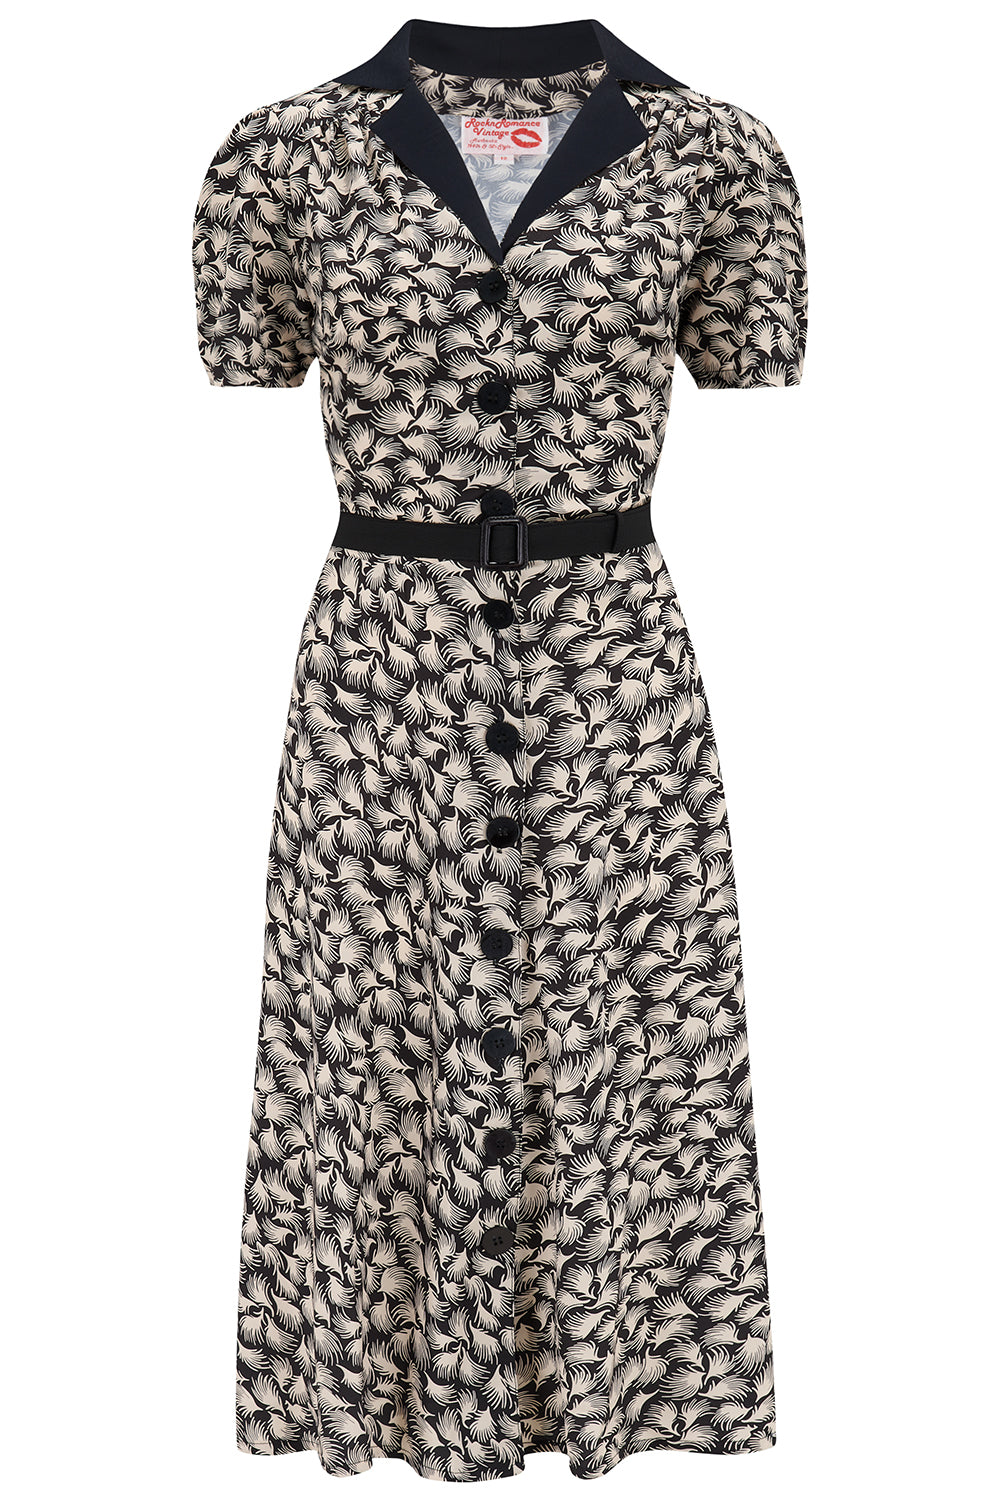 The "Charlene" Shirtwaister Dress in Black Whisp Print With Contrast Collar, True 1950s Vintage Style - True and authentic vintage style clothing, inspired by the Classic styles of CC41 , WW2 and the fun 1950s RocknRoll era, for everyday wear plus events like Goodwood Revival, Twinwood Festival and Viva Las Vegas Rockabilly Weekend Rock n Romance Rock n Romance